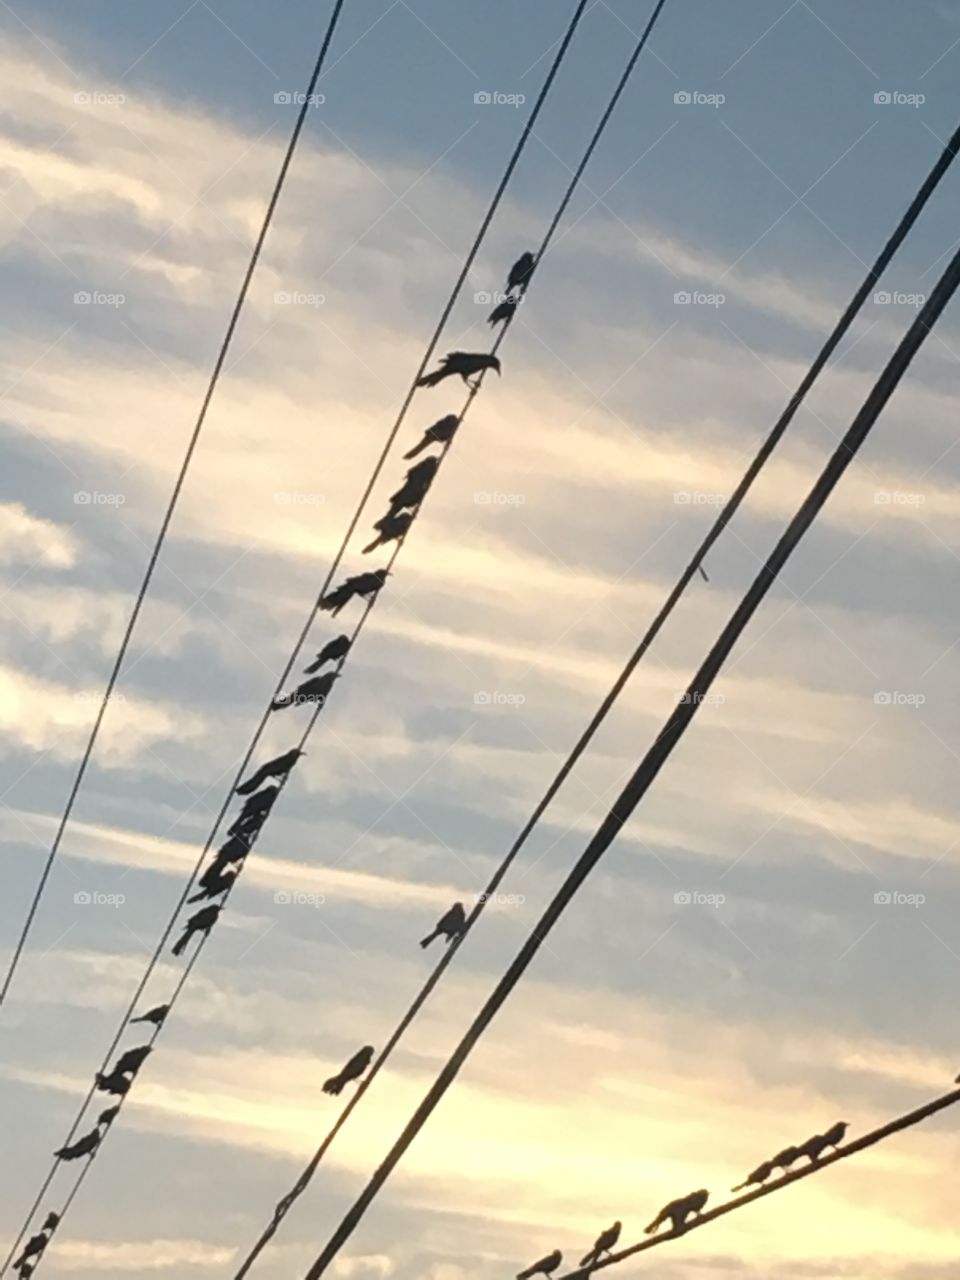 Birds on a wire at sunset